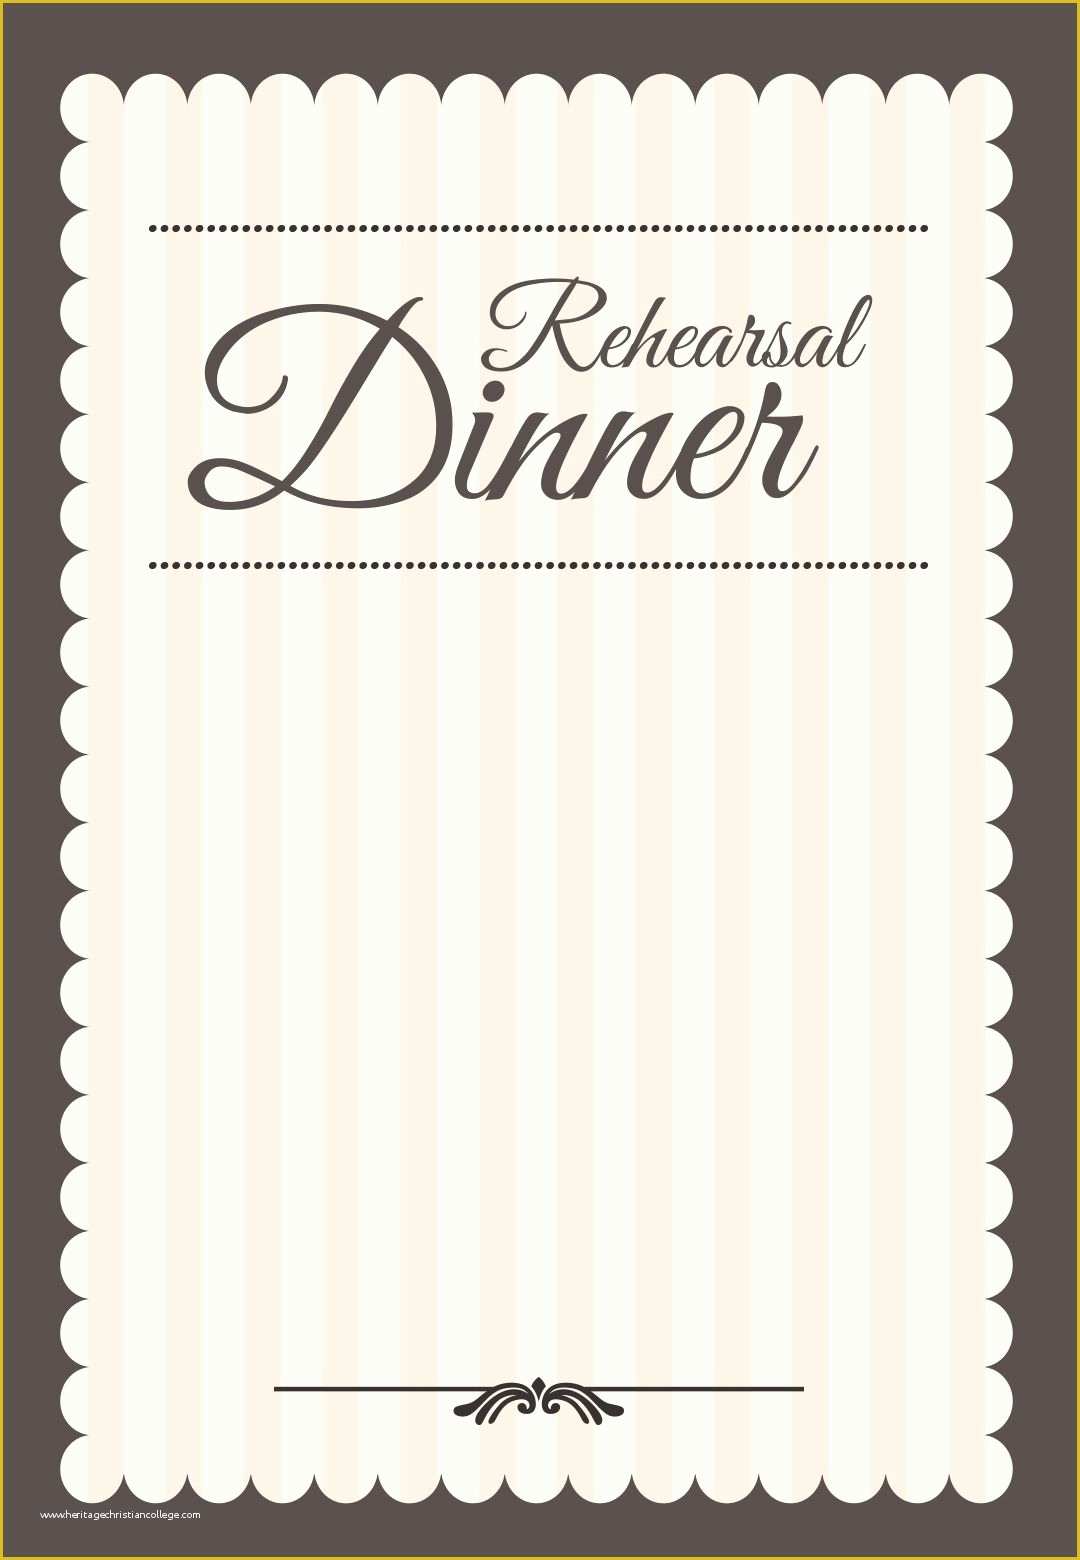 Free Printable Dinner Party Invitations Templates Of Stamped Rehearsal Dinner Free Printable Rehearsal Dinner